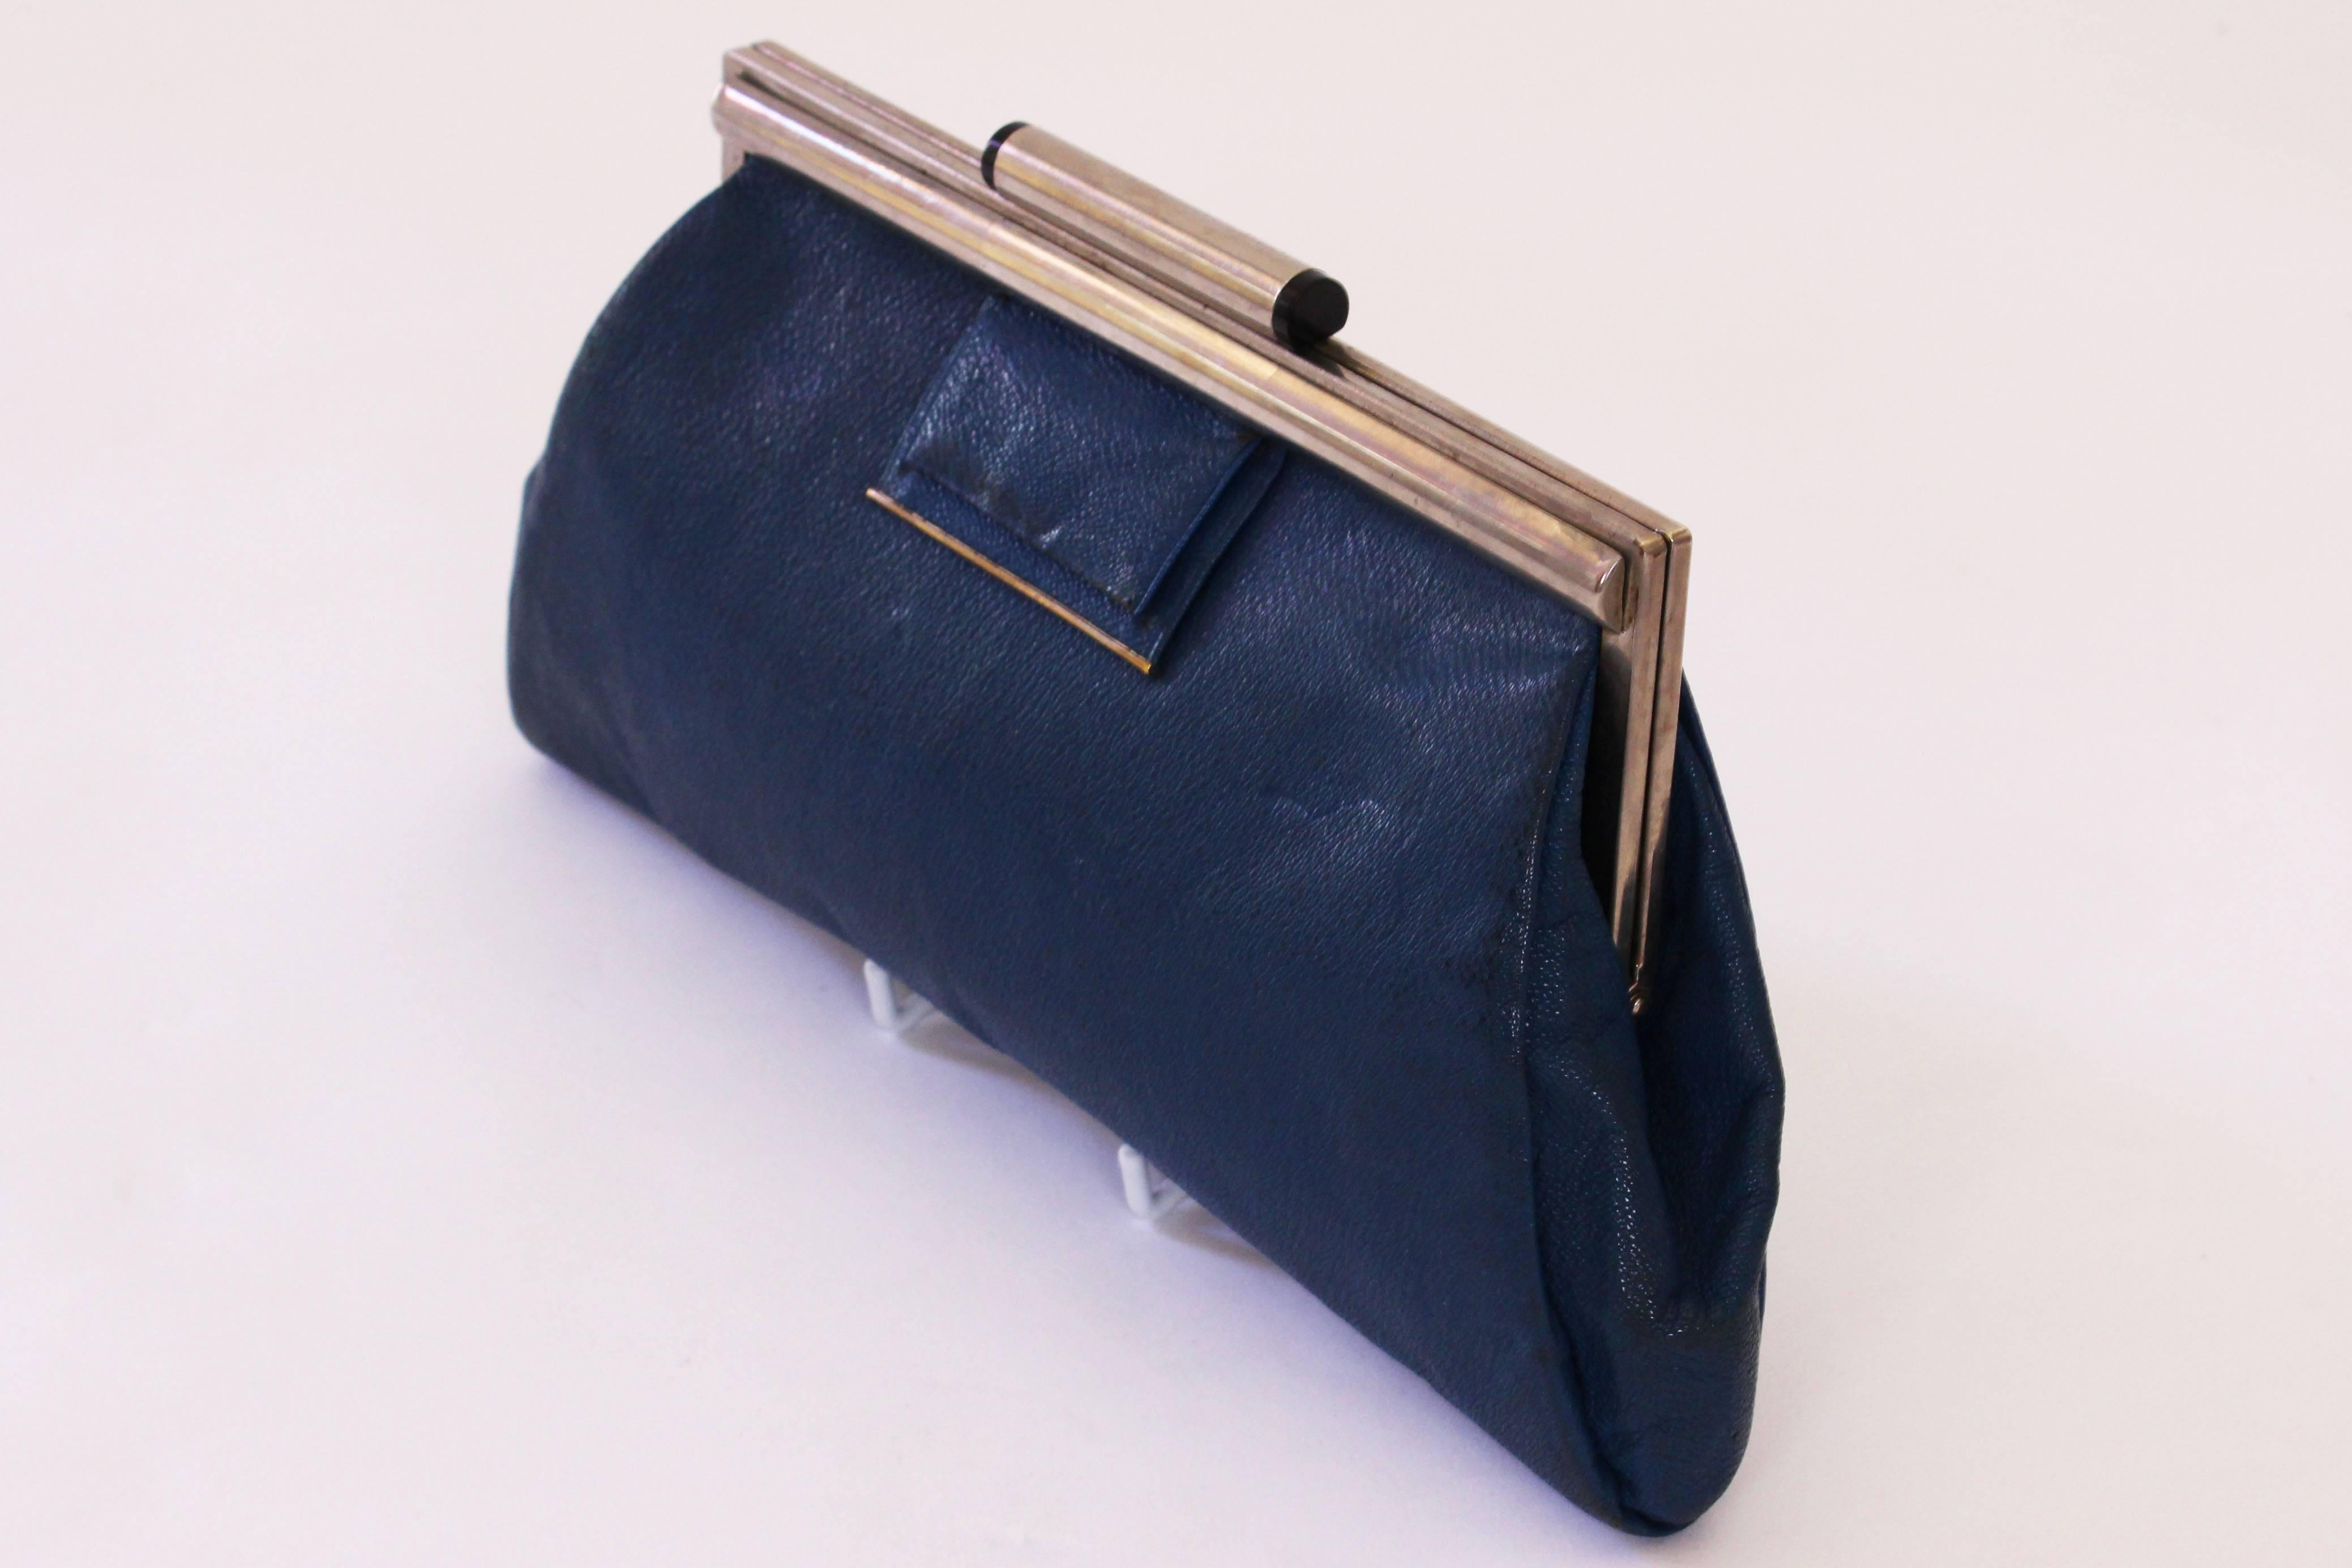 A chic and charming Art Deco style bag in a hard wearing blue leather, with a silver frame and clasp. The bag is in a sea blue leather with finger clasp at the back. The lining is blue and there is an internal purse with two compartments and an